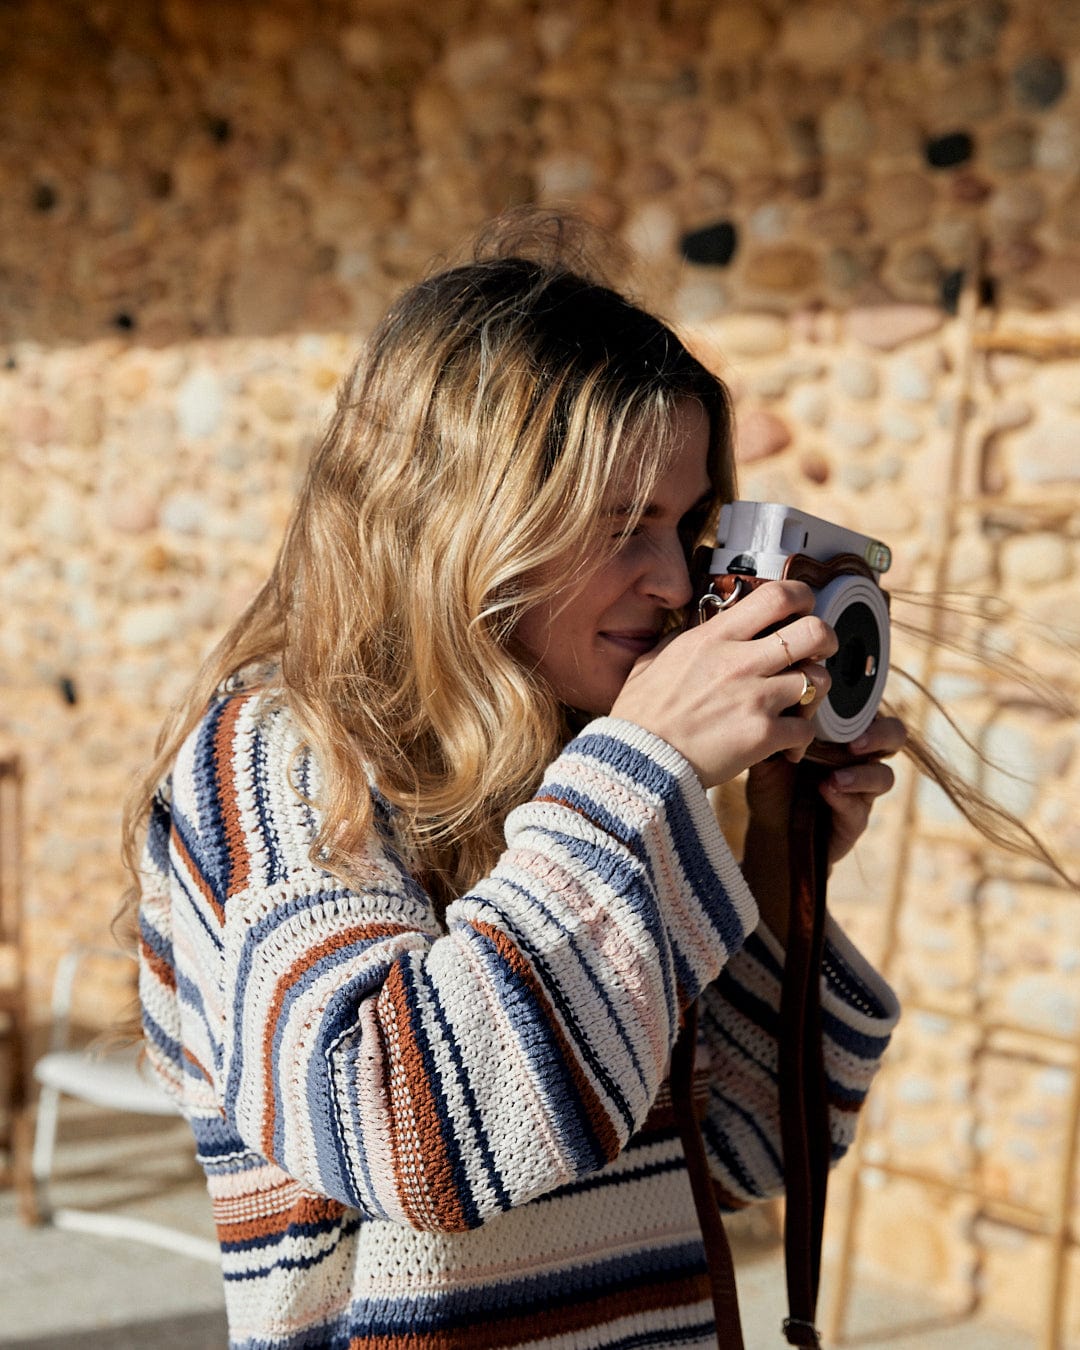 A woman snapping a photo with the Saltrock Aubrey Pop - Womens Hooded Crochet Knit - Cream in front of a stone wall.